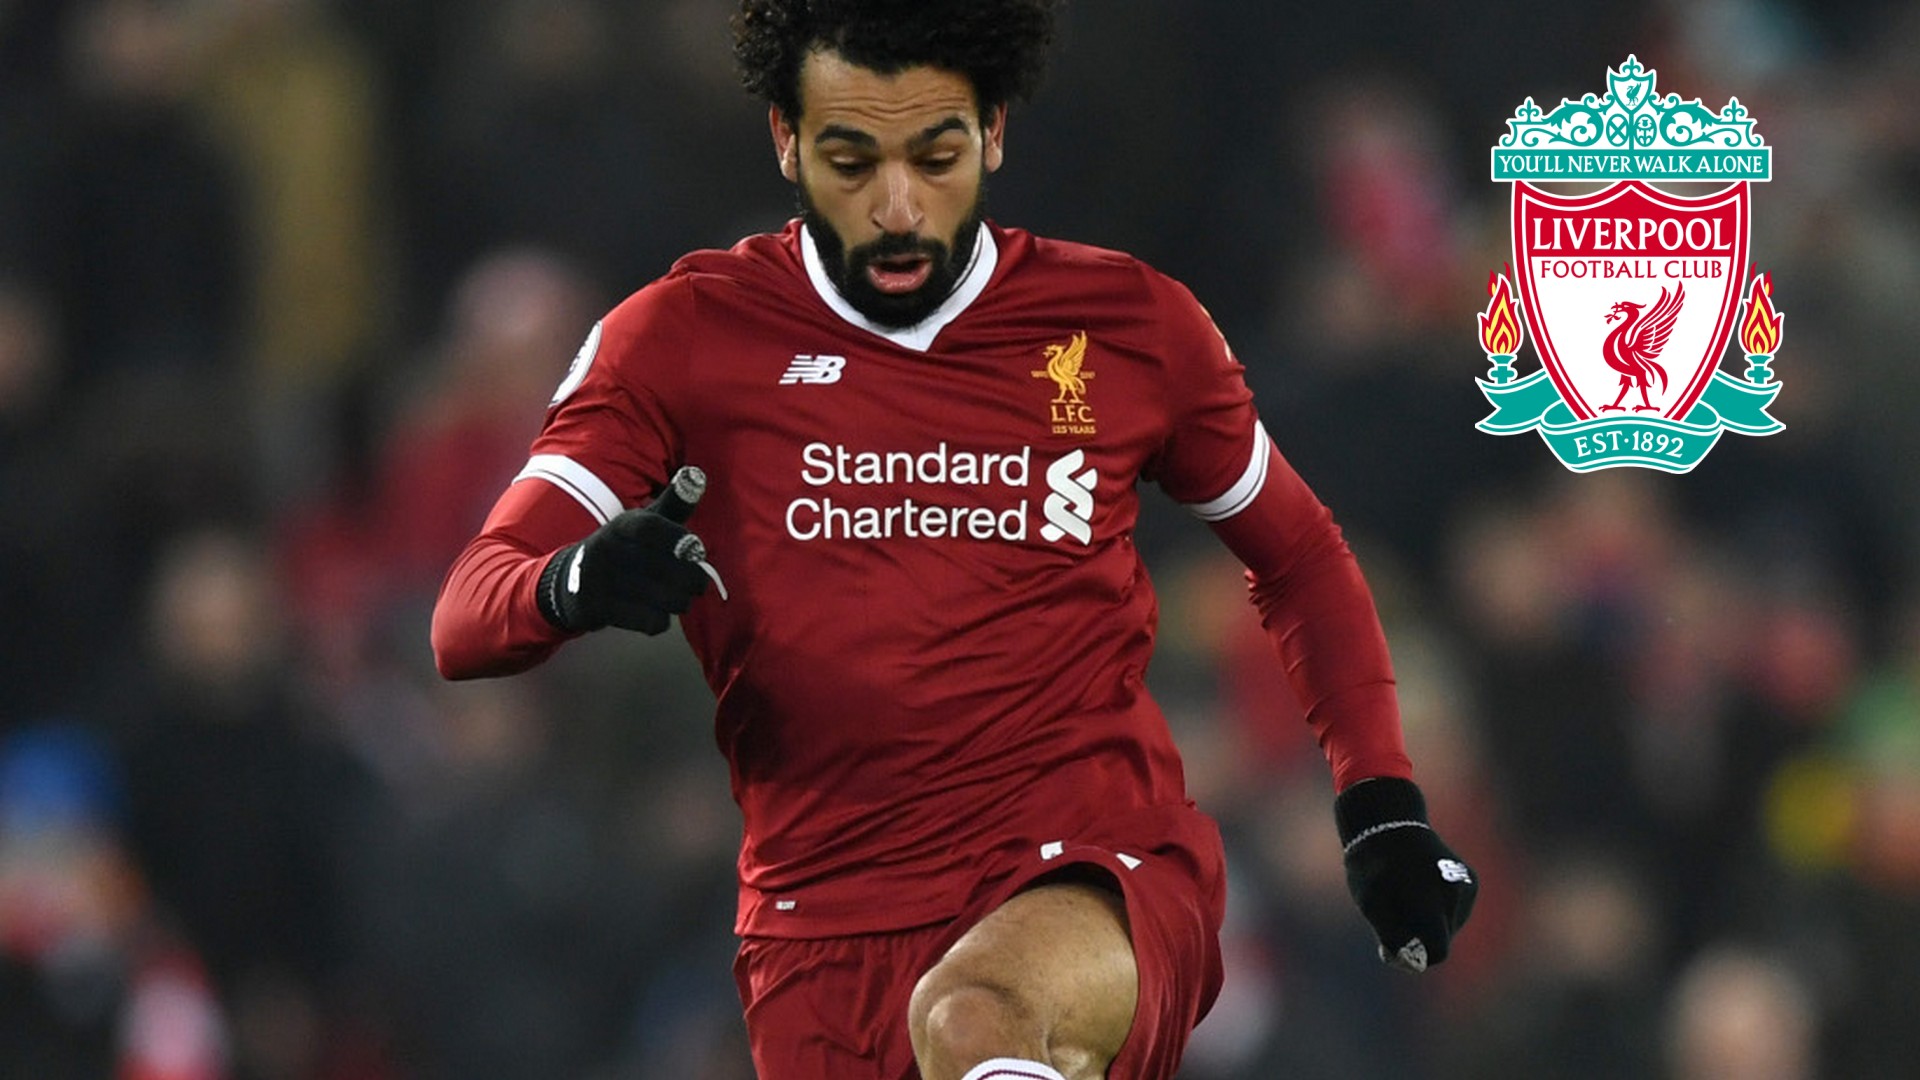 Mohamed Salah Liverpool Wallpaper For Desktop with image resolution 1920x1080 pixel. You can use this wallpaper as background for your desktop Computer Screensavers, Android or iPhone smartphones